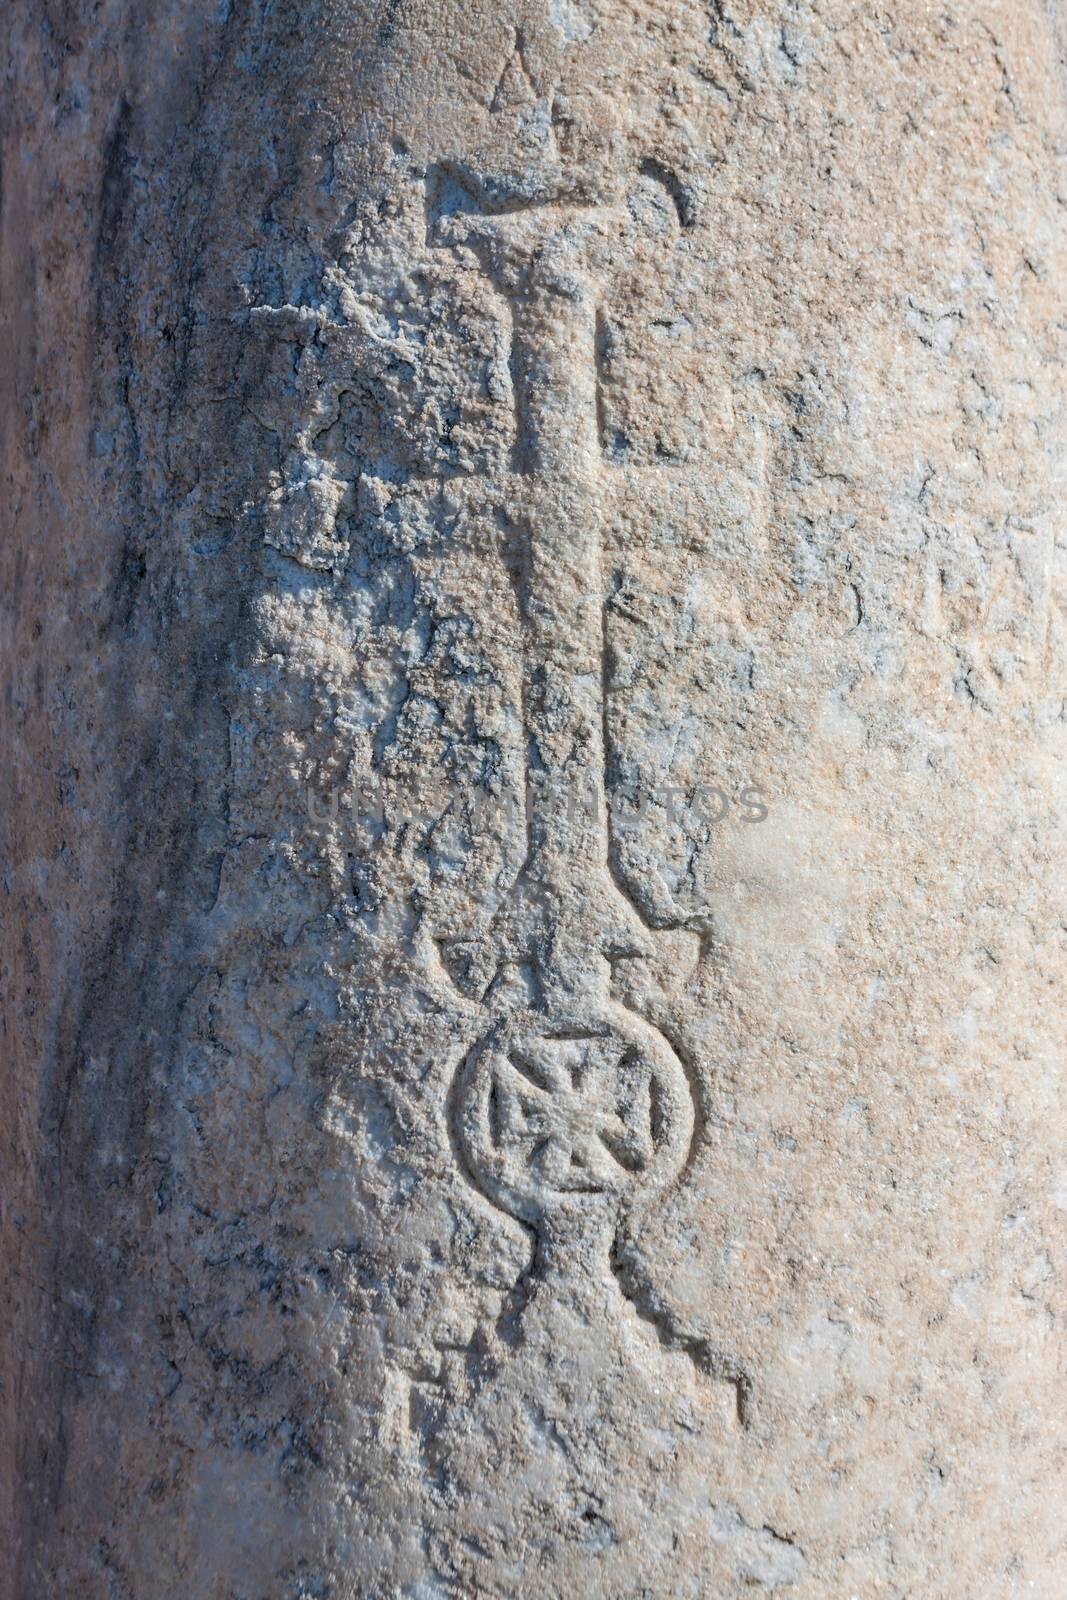 Greek style Christian cross carved into a column at Selcuk in Turkey